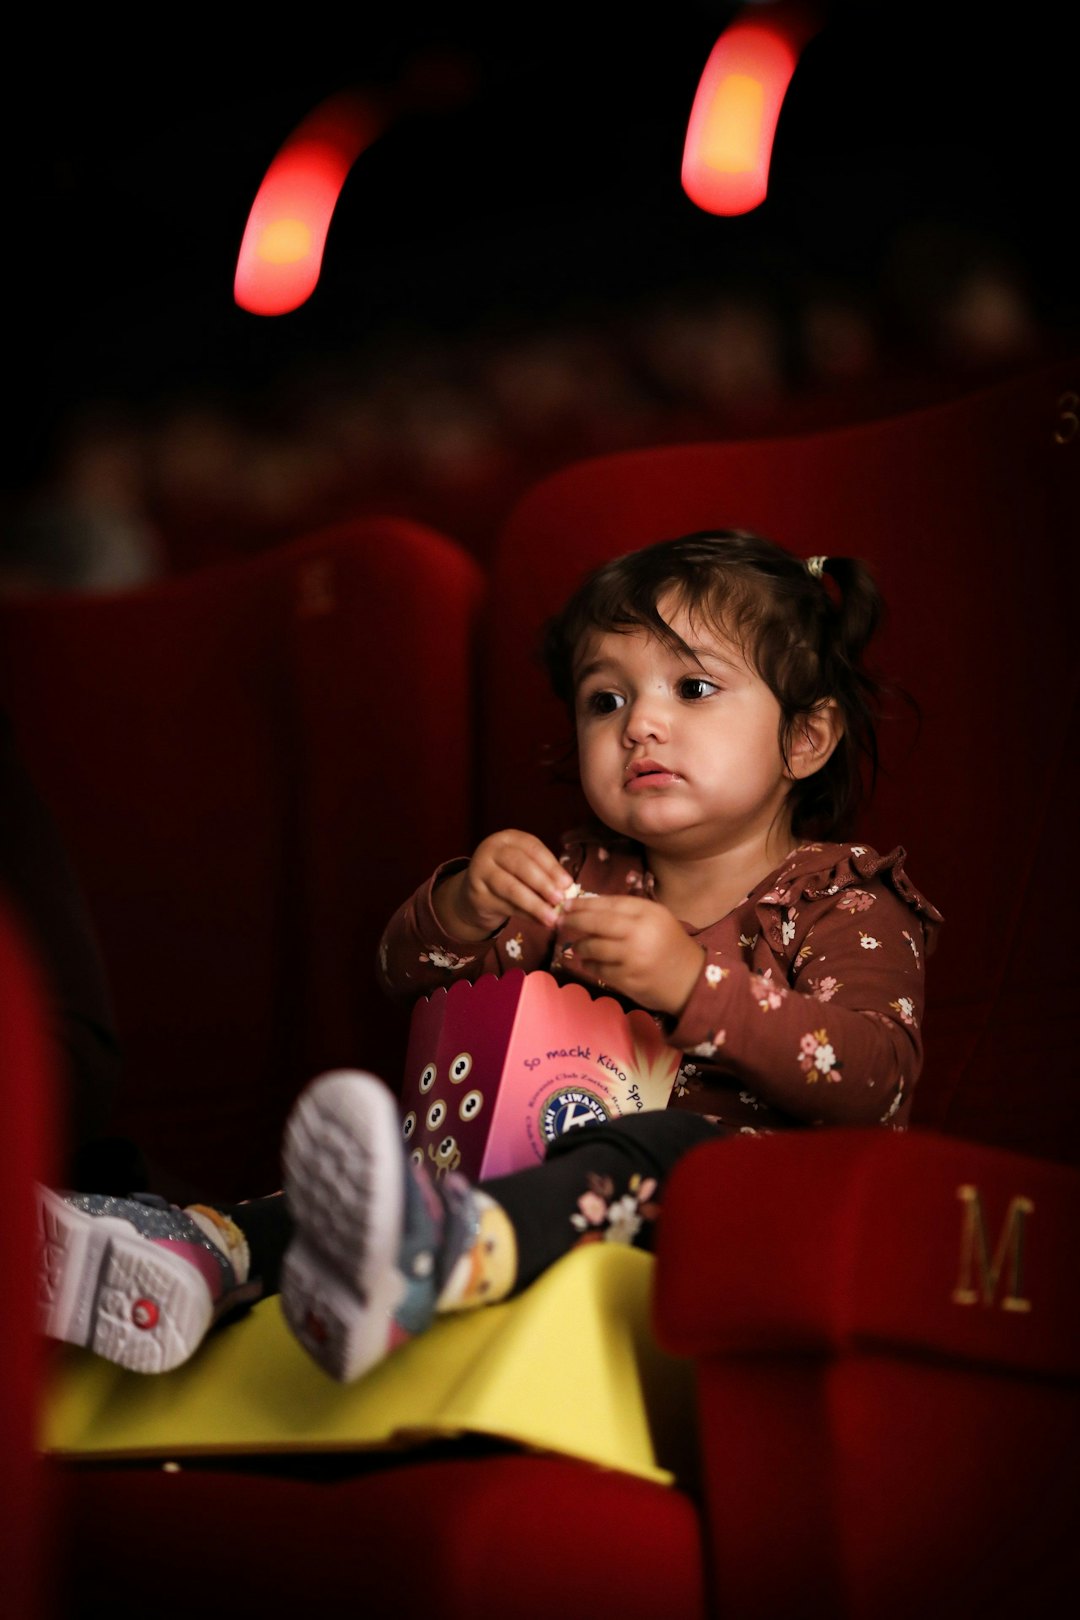 A little girl on a cinema seat eating popcorn.